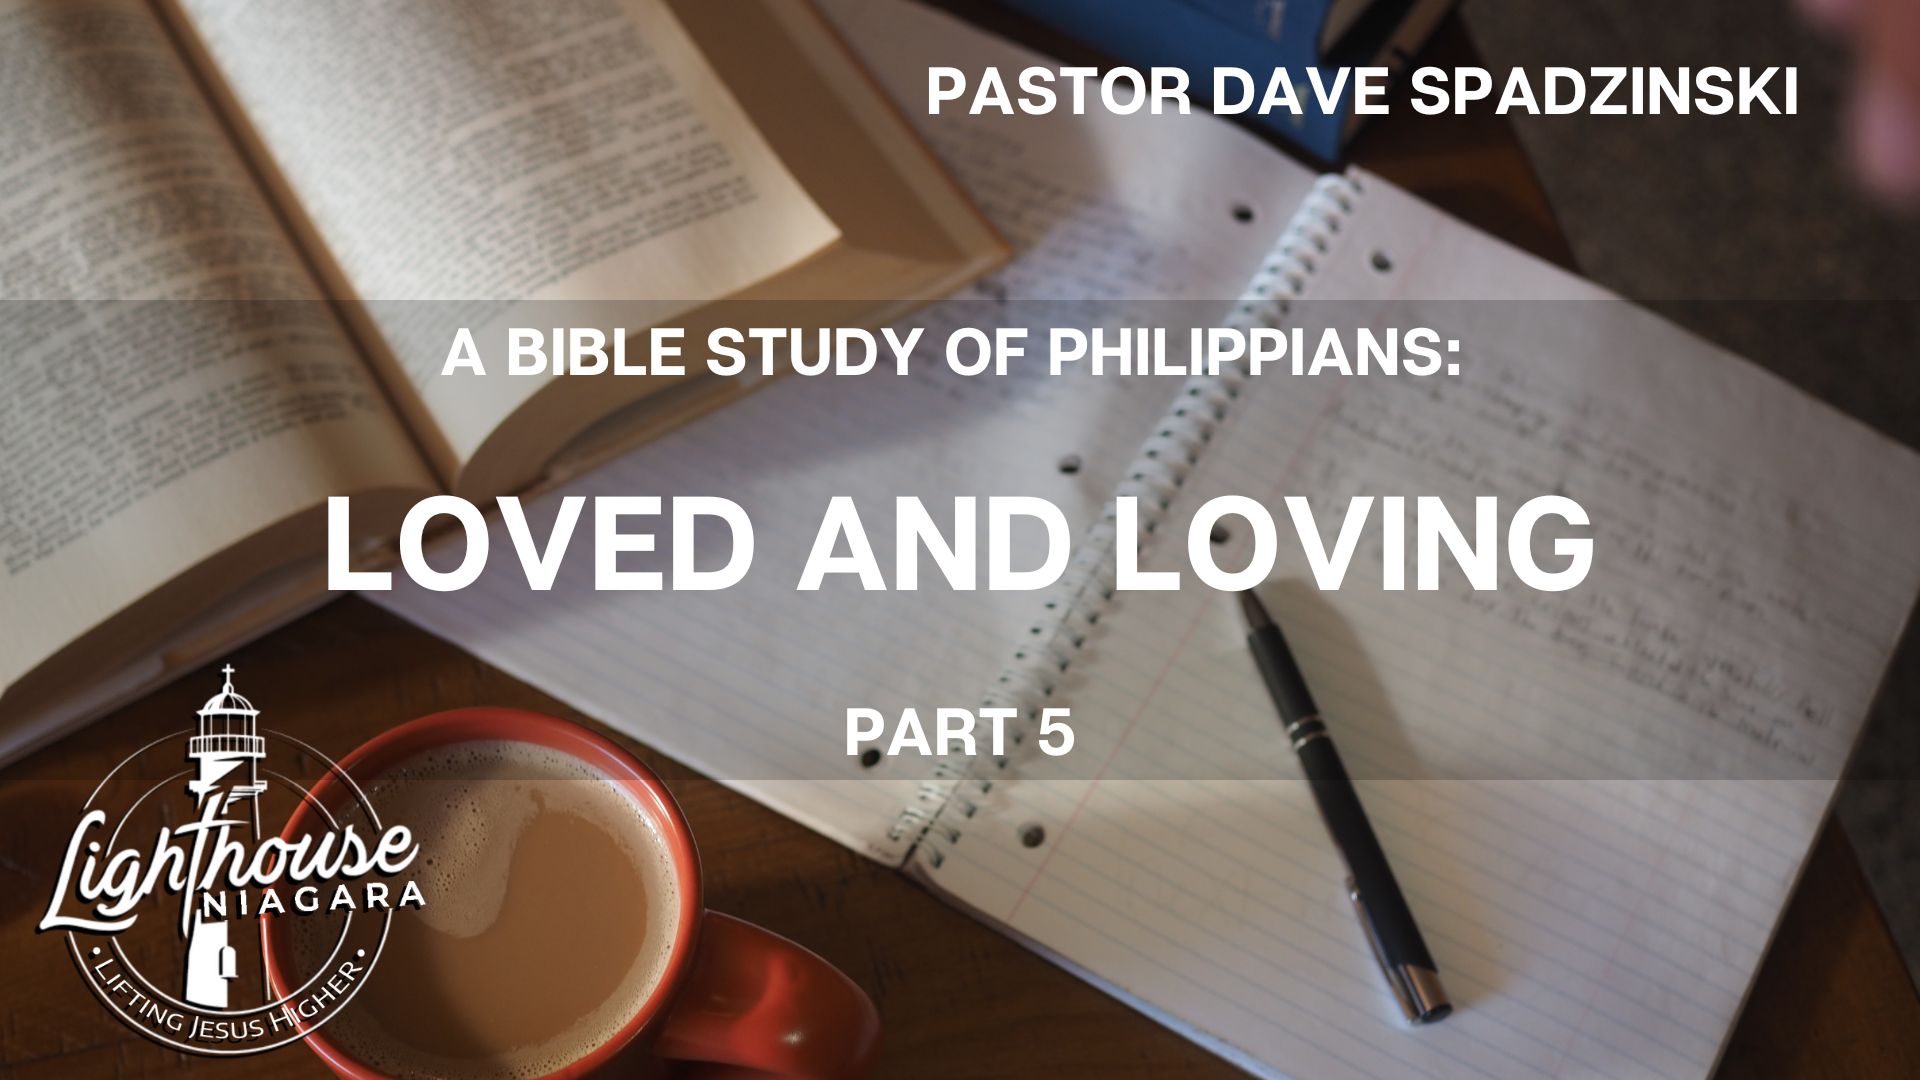 A Bible Study Of Philippians: Loved And Loving - Pastor Dave Spadzinski